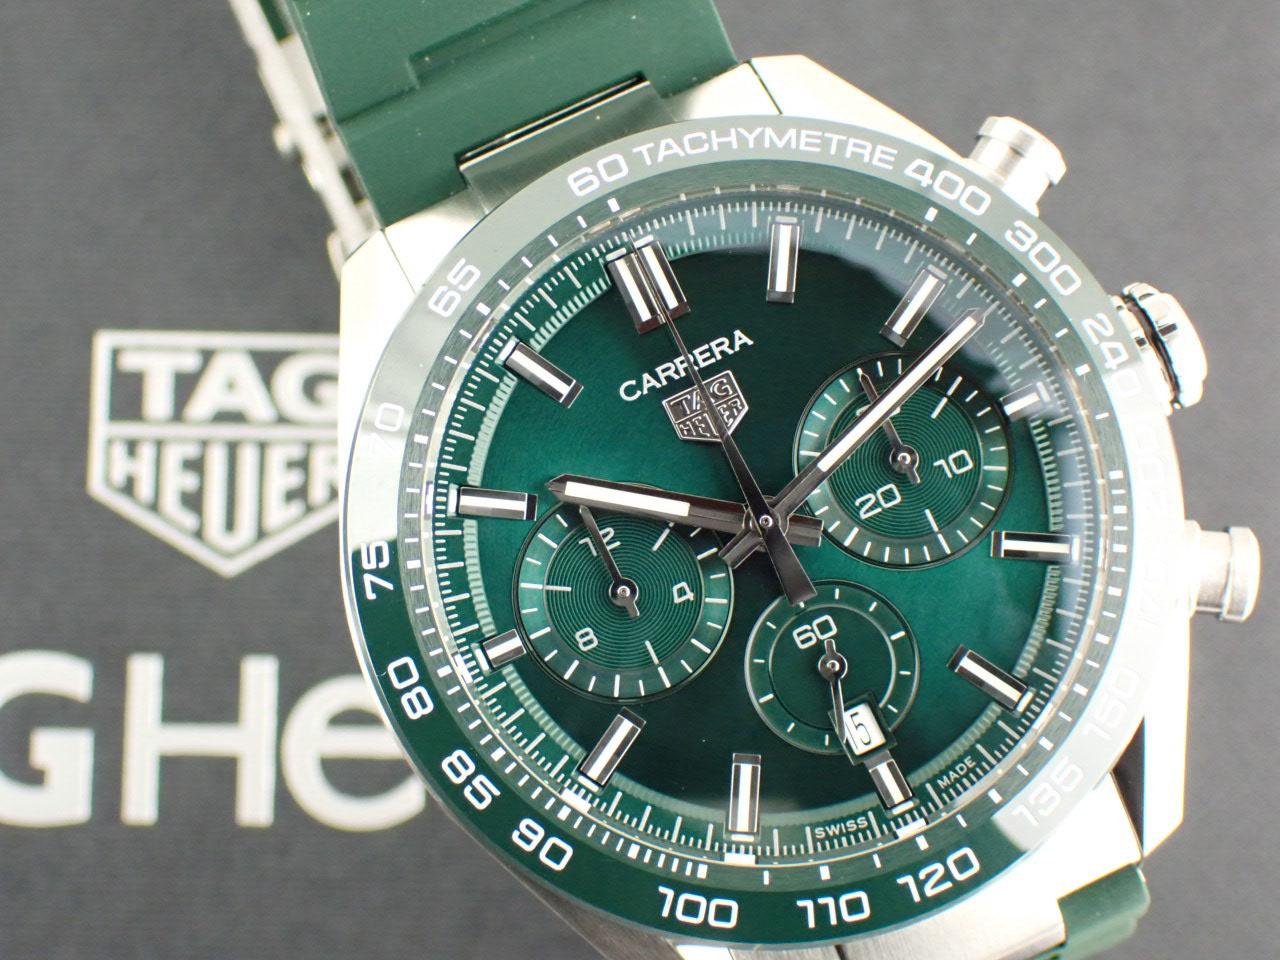 tagheuer-CBN2A1N-FT6238-review